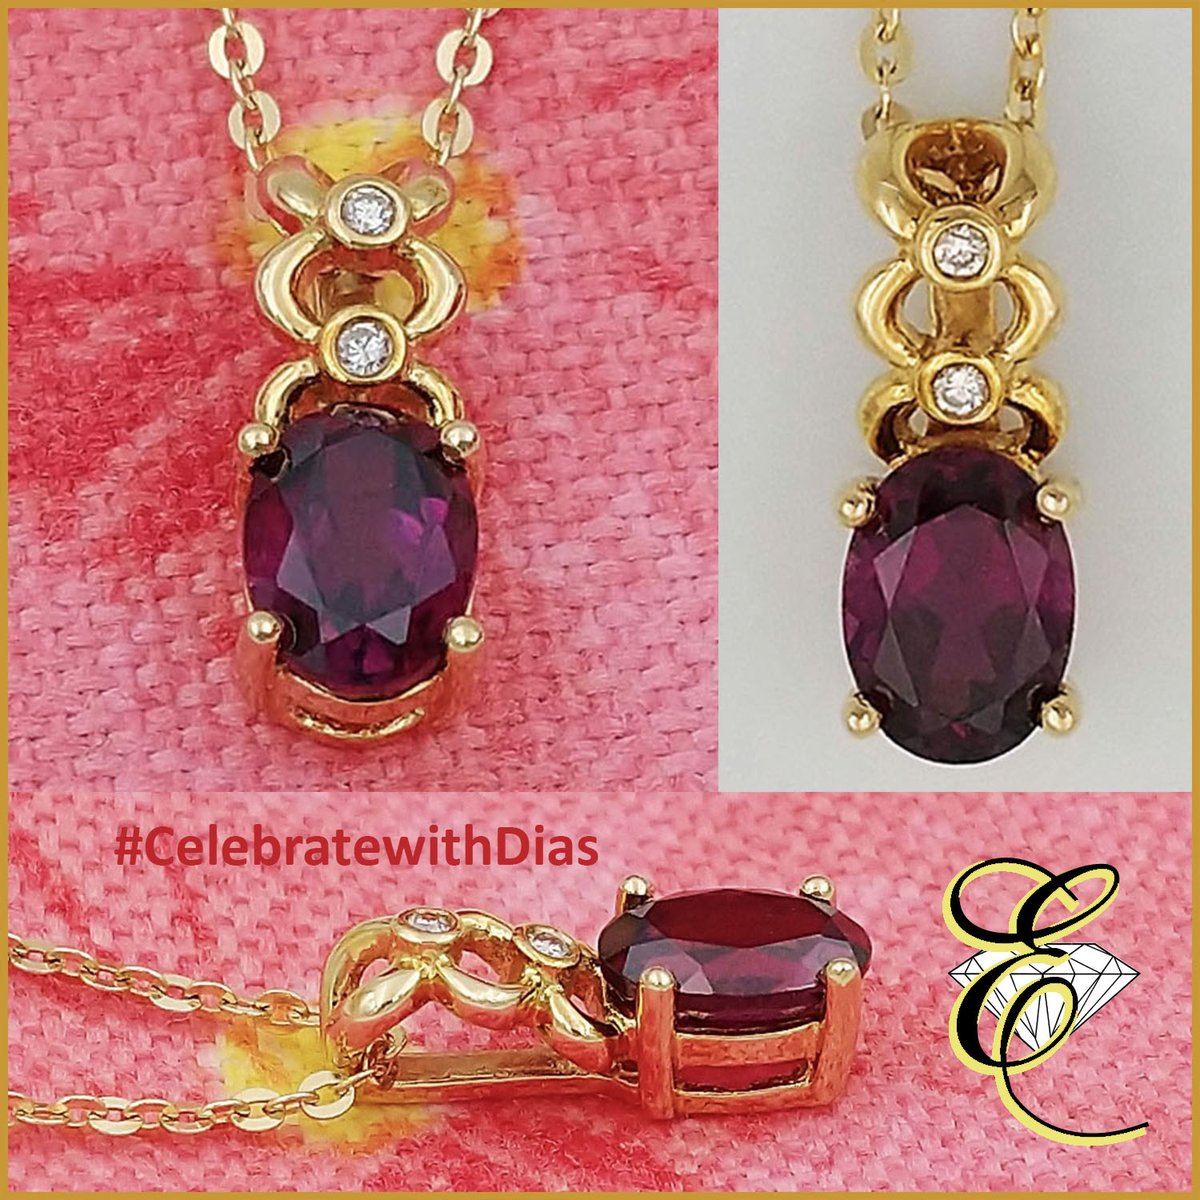 14K yellow gold Pendant with an oval Rhodolite Garnet and 2 round brilliant-cut Diamonds. From Our Estate Collection $400. Chain sold separately.

#start2sparkle #alwaysthinkDIAMONDS #eichhornglow #1diamondatatime #CelebratewithDias #ColorWithYourDias #estatejewelry